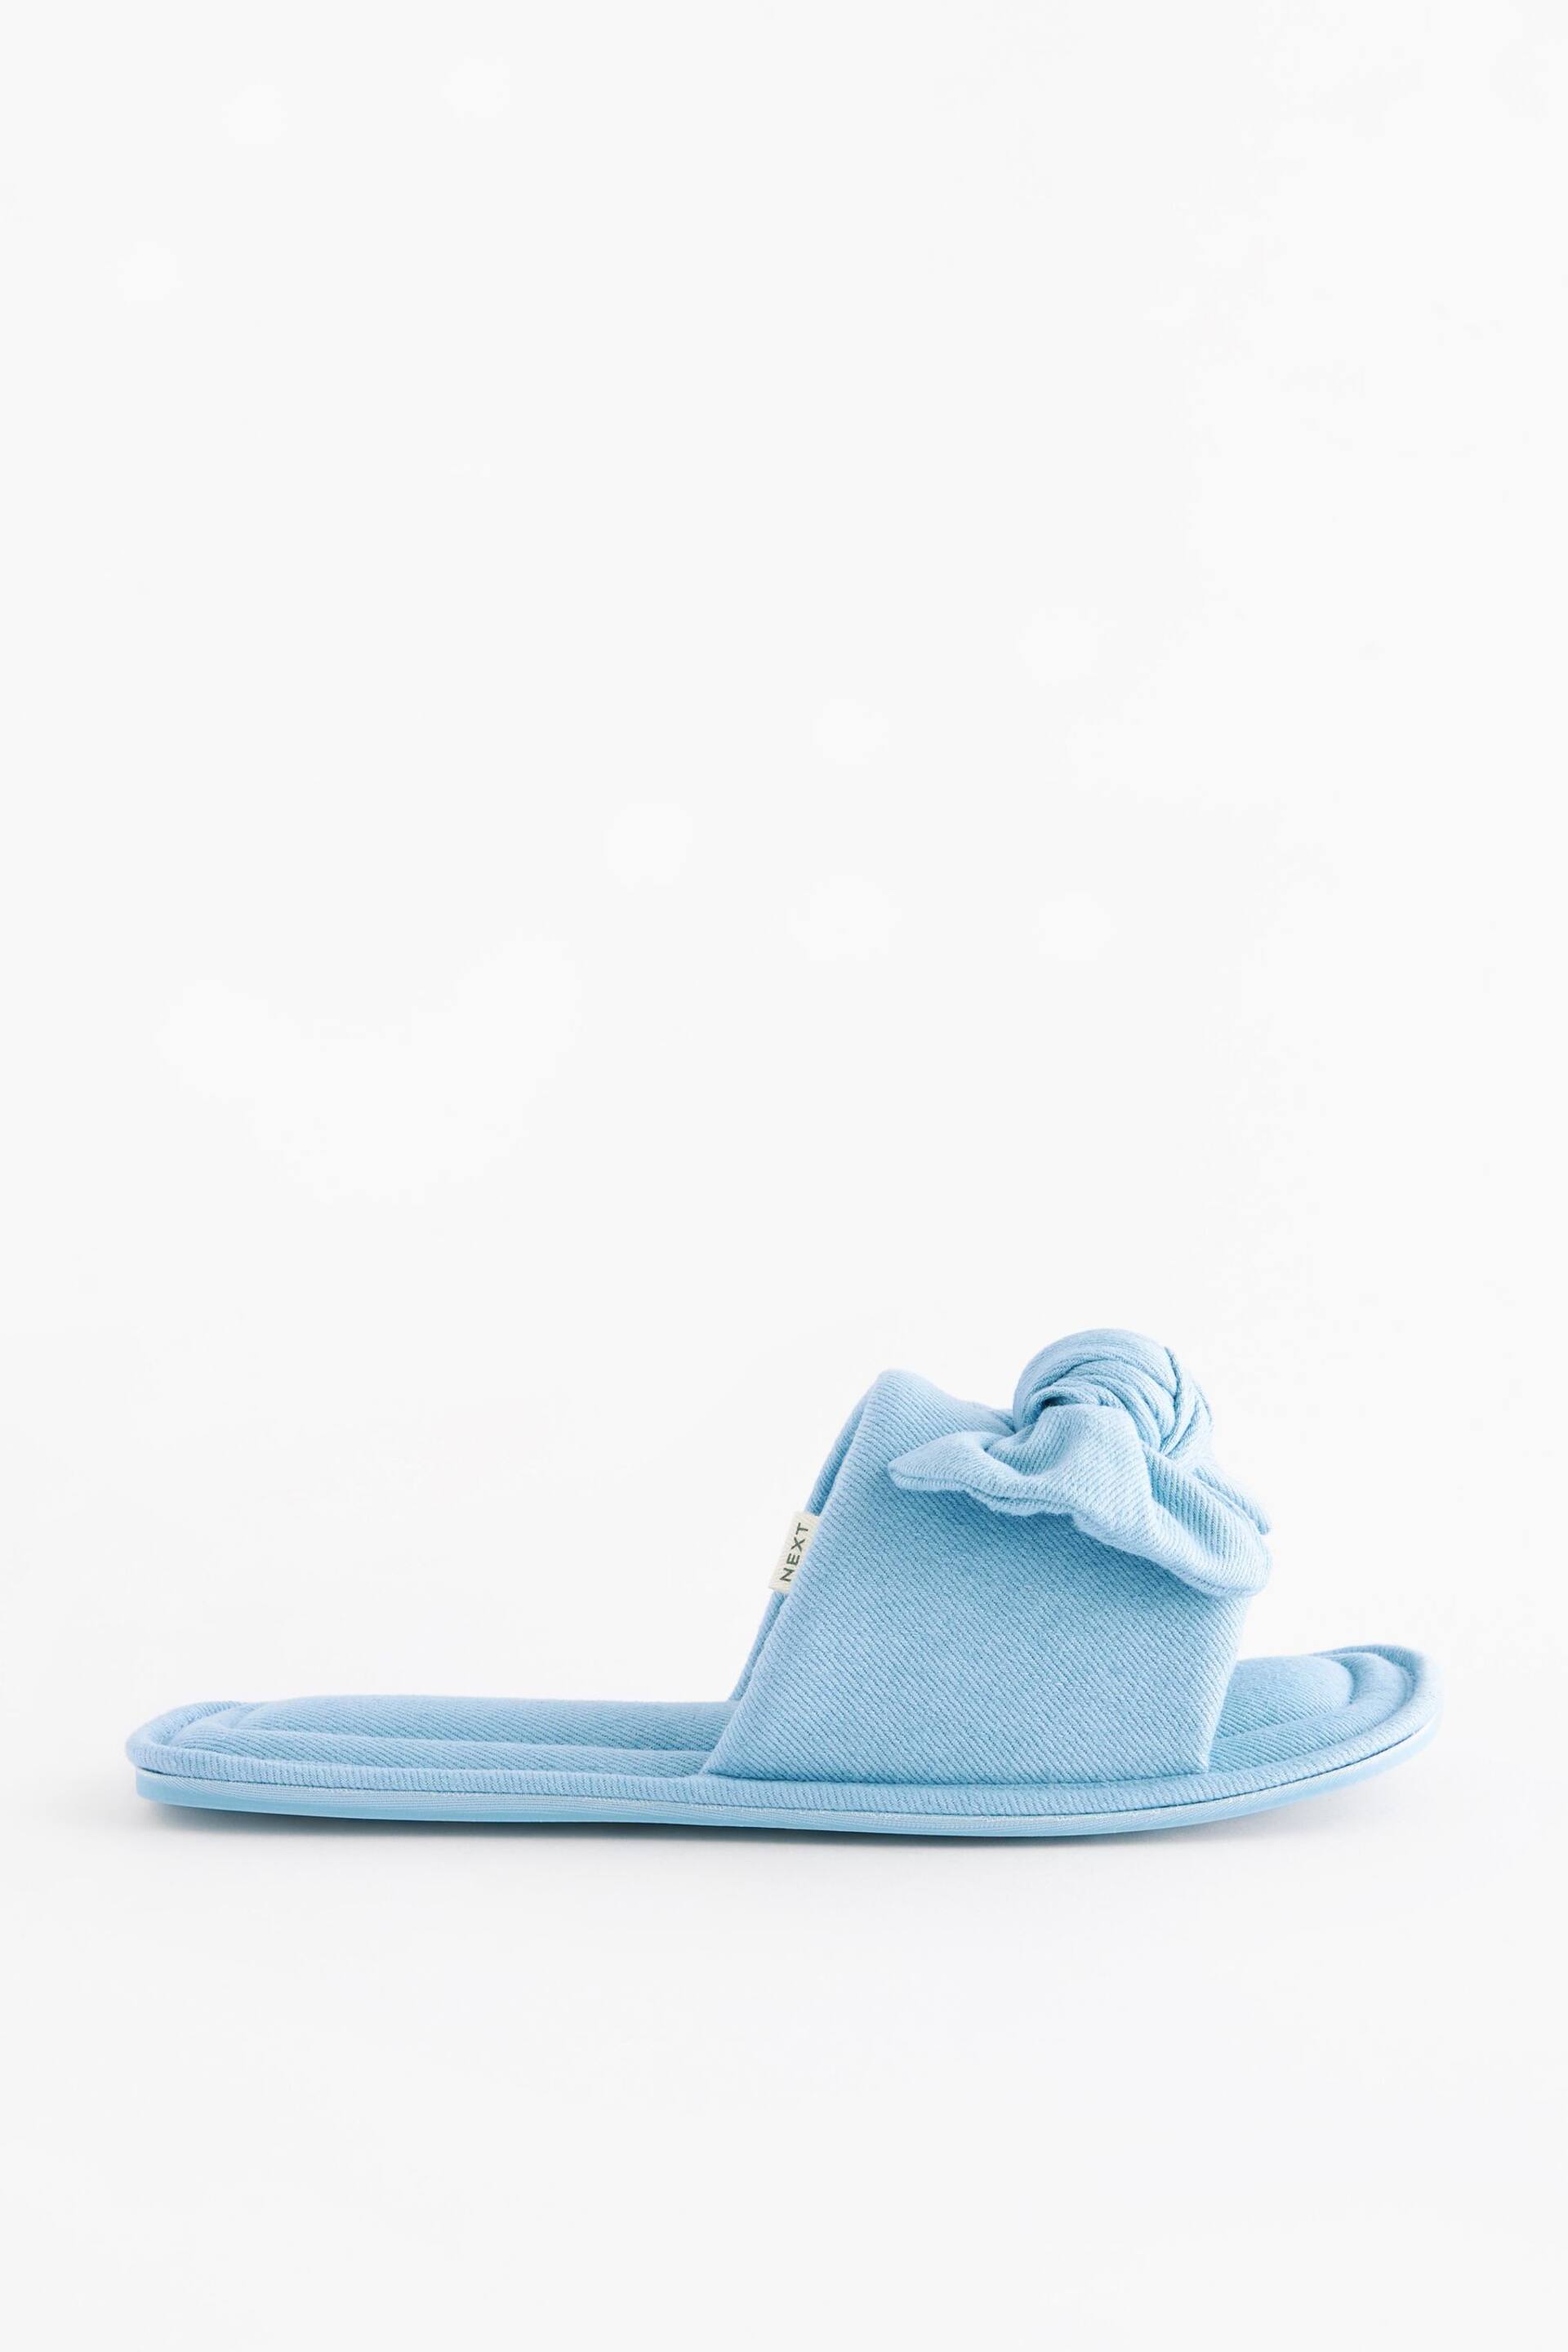 Blue Bow Mule Slippers - Image 4 of 7